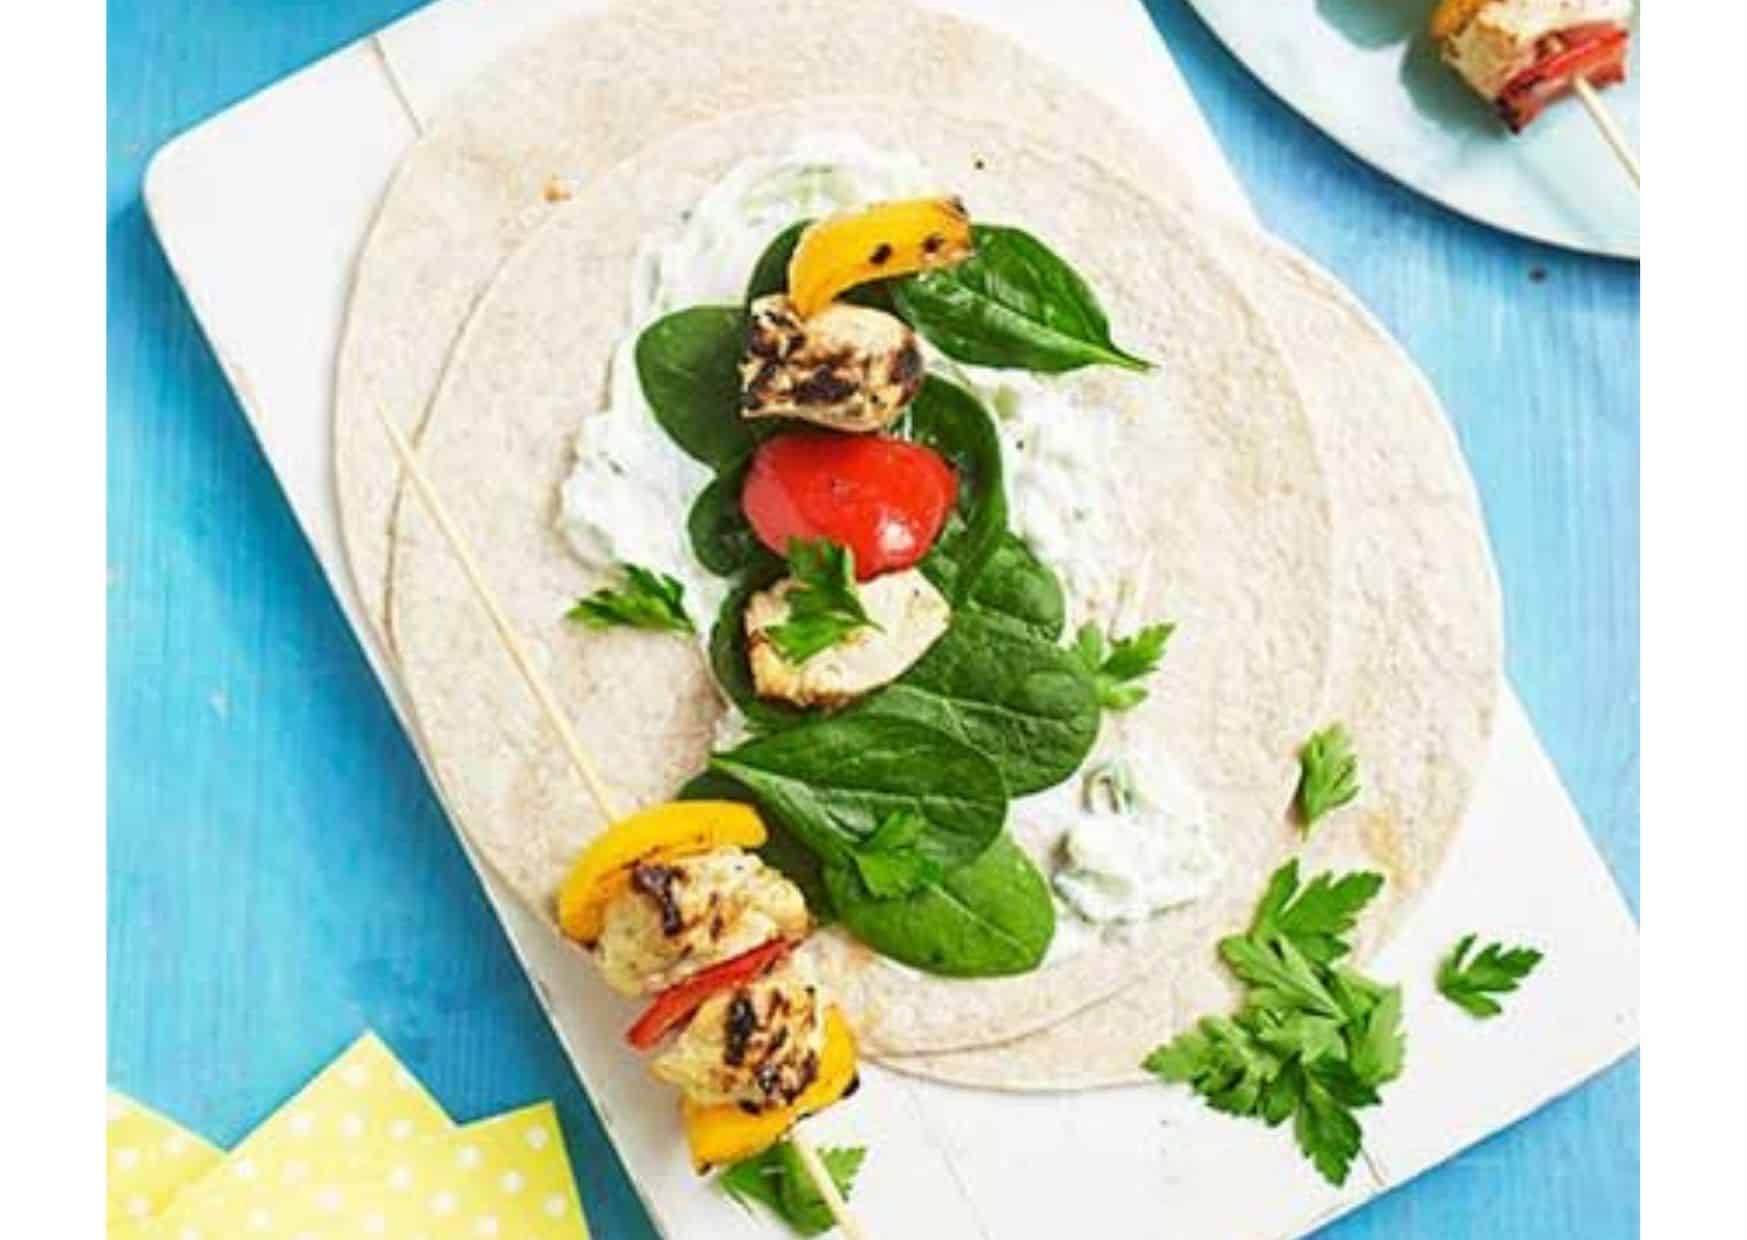 20 Healthy and Tasty Family Meals Ideas to Try This Week